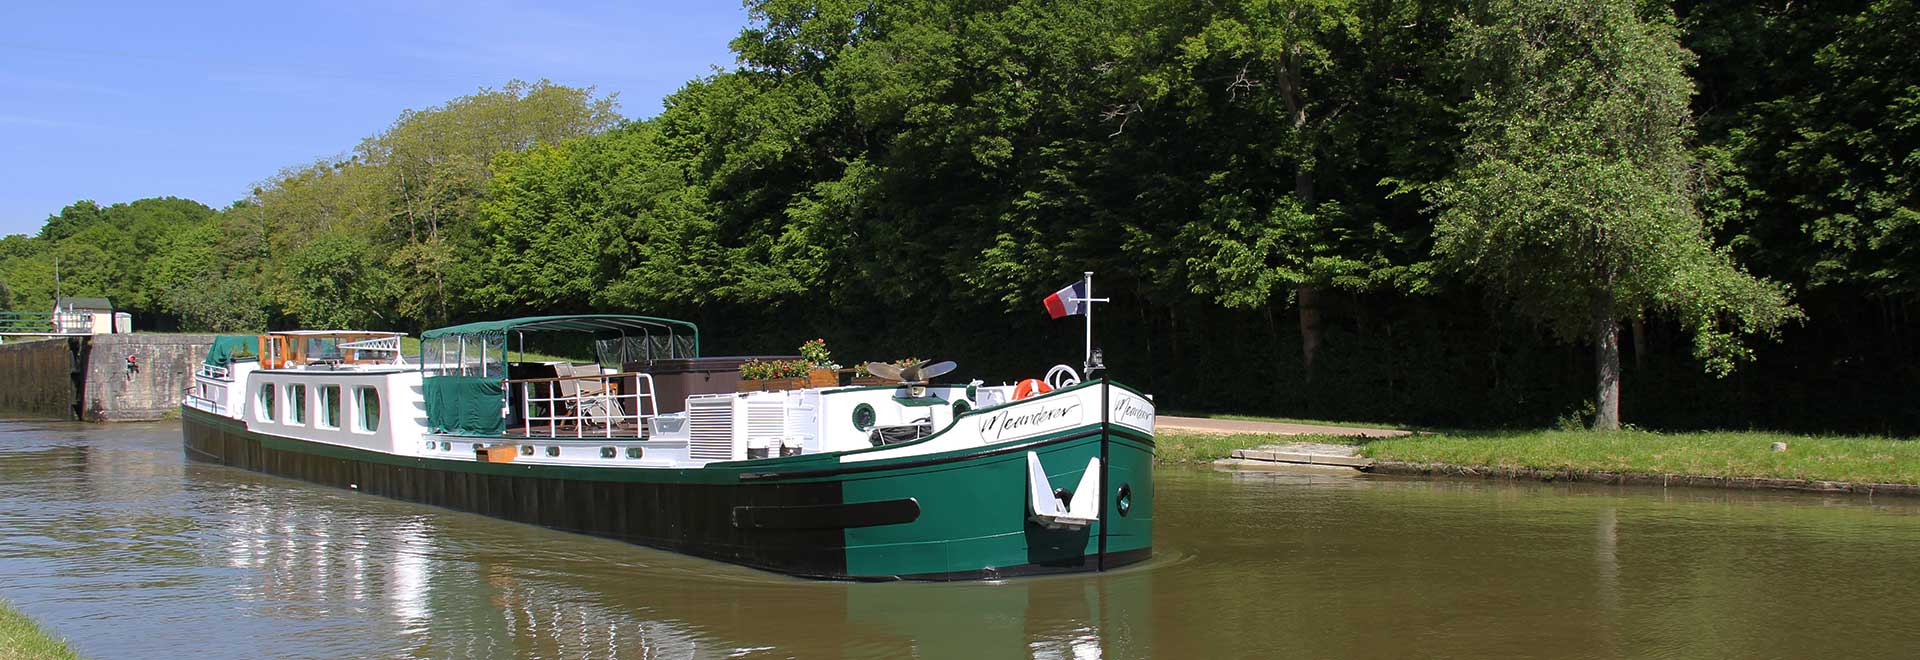 Europe France Meanderer CanaldeBriare Lateral alaLoire Barge MH